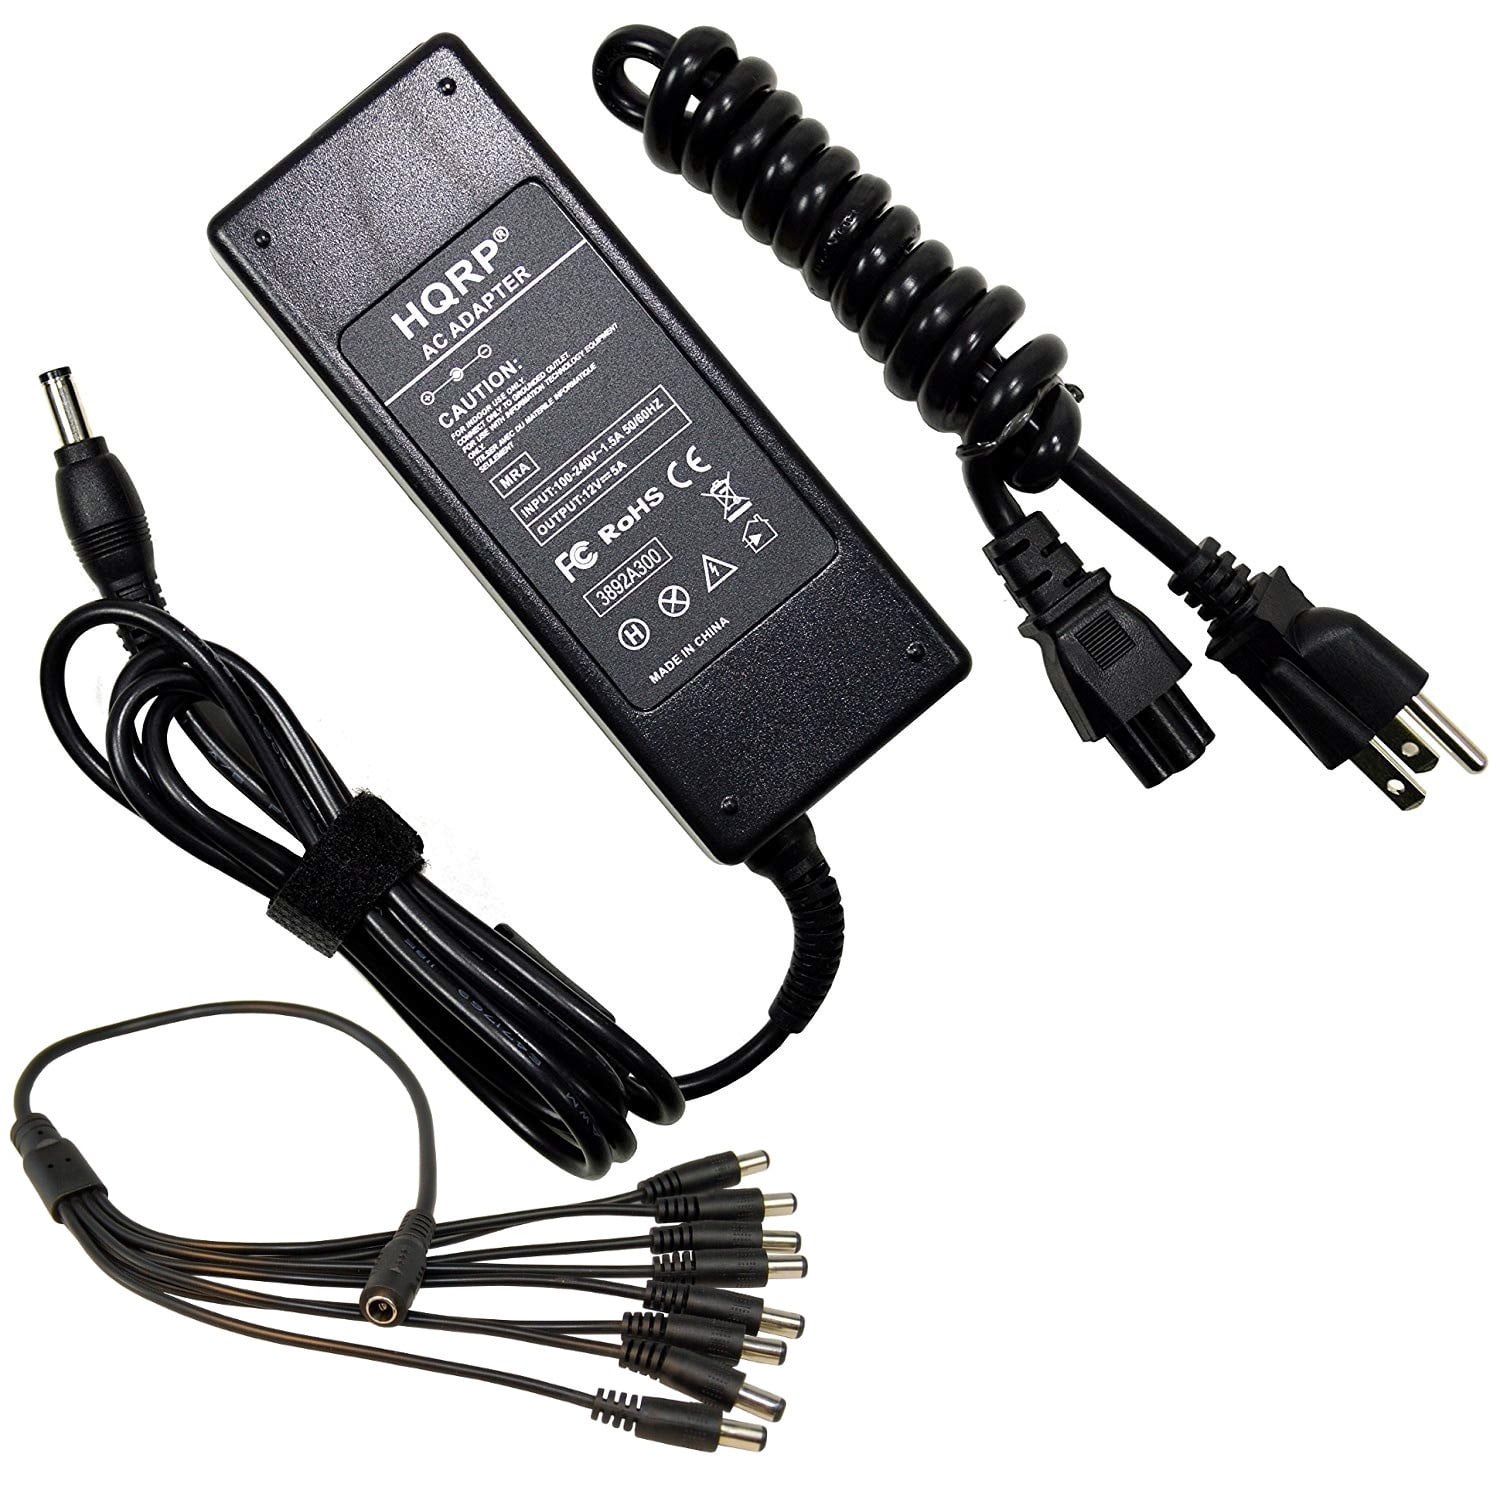 DC 12V 7A Power Supply Adapter 8 Split Power Cable for CCTV Security Camera DVR 